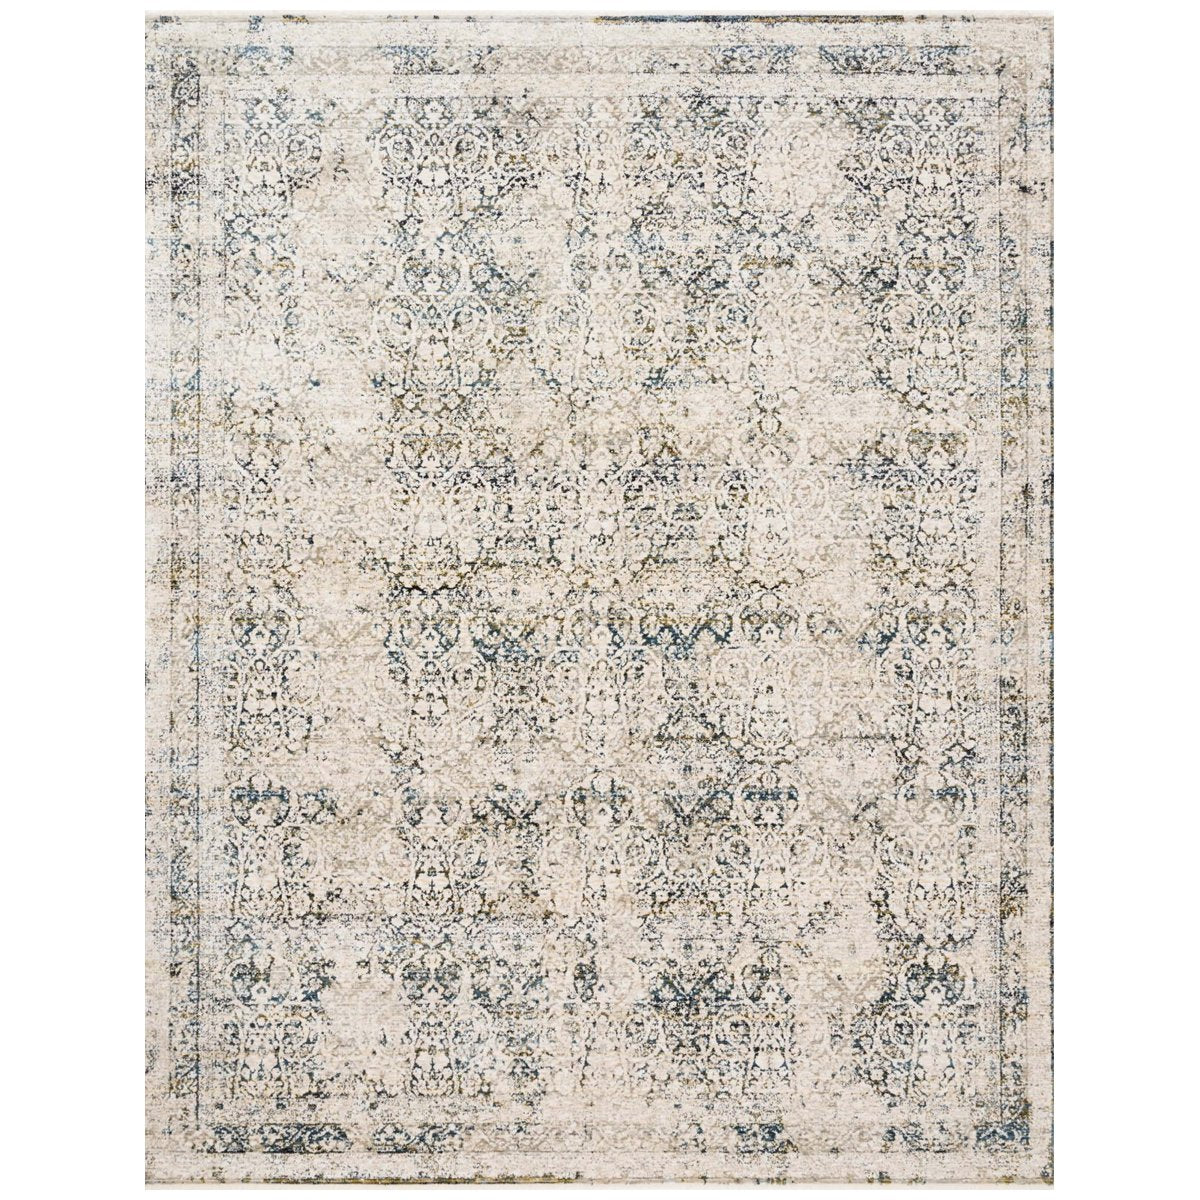 Loloi Theia THE-01 Natural Ocean Power Loomed Rug